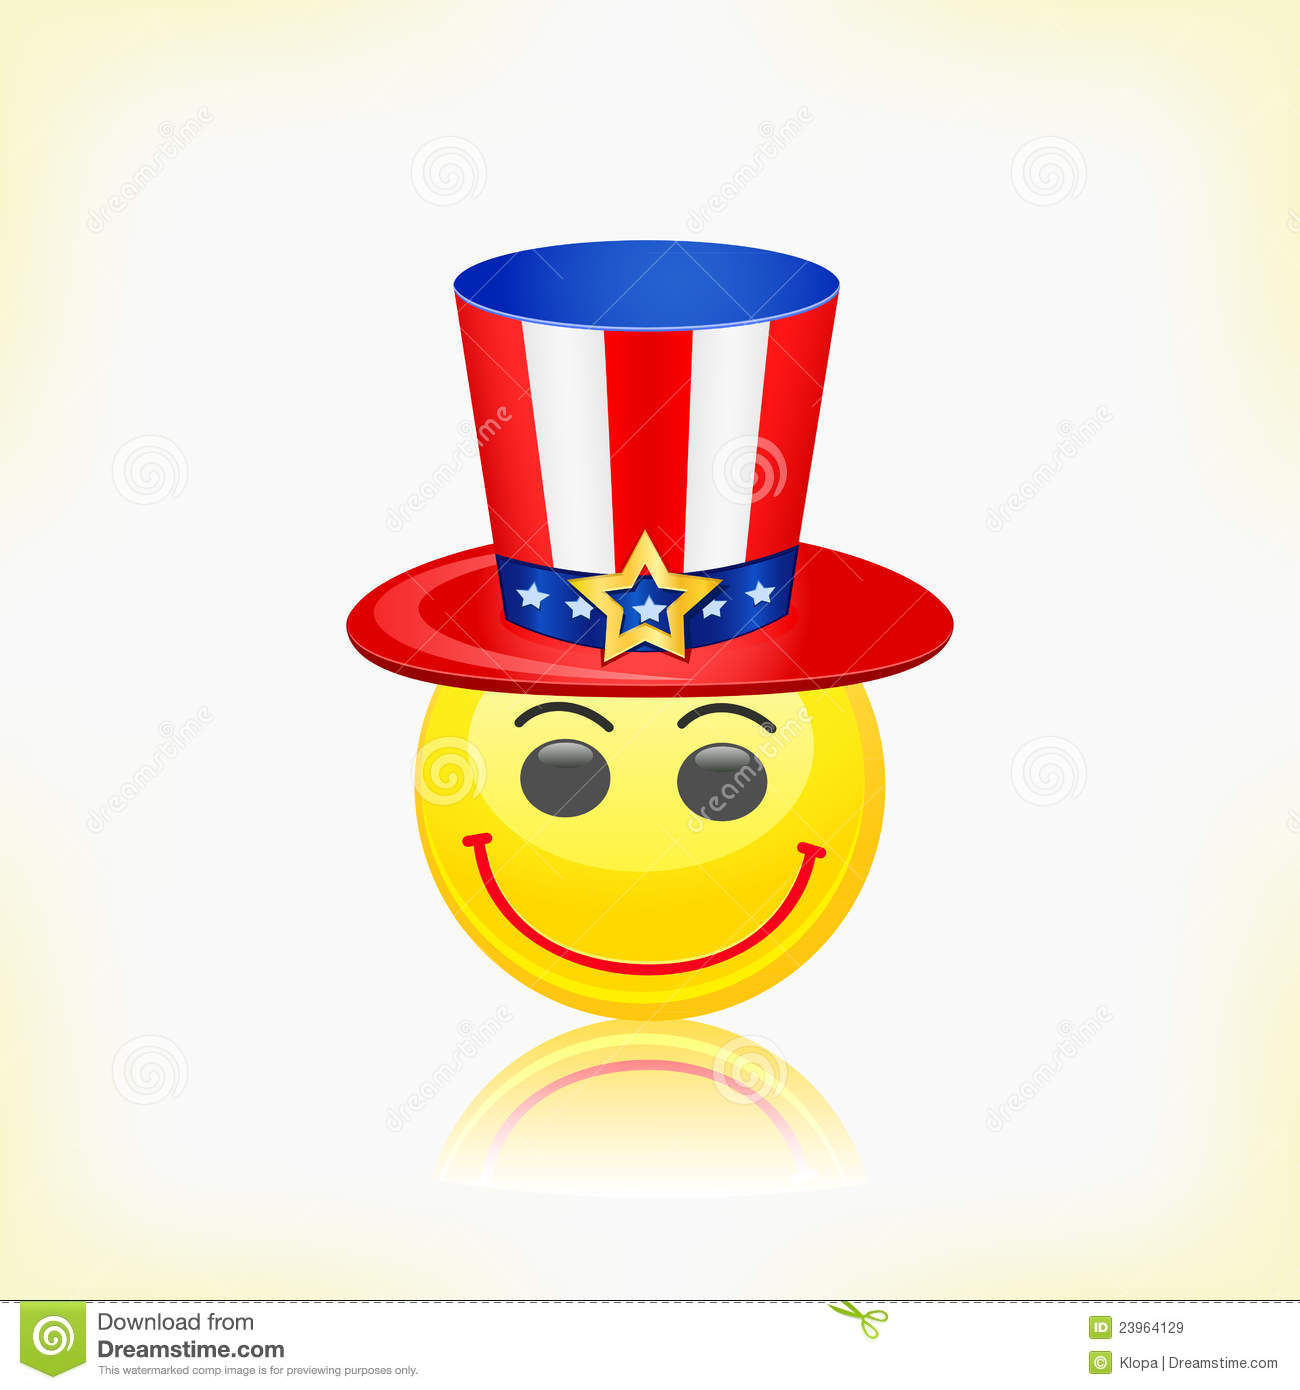 Yellow Round Smiley Face Wearing American Hat Royalty Free Stock